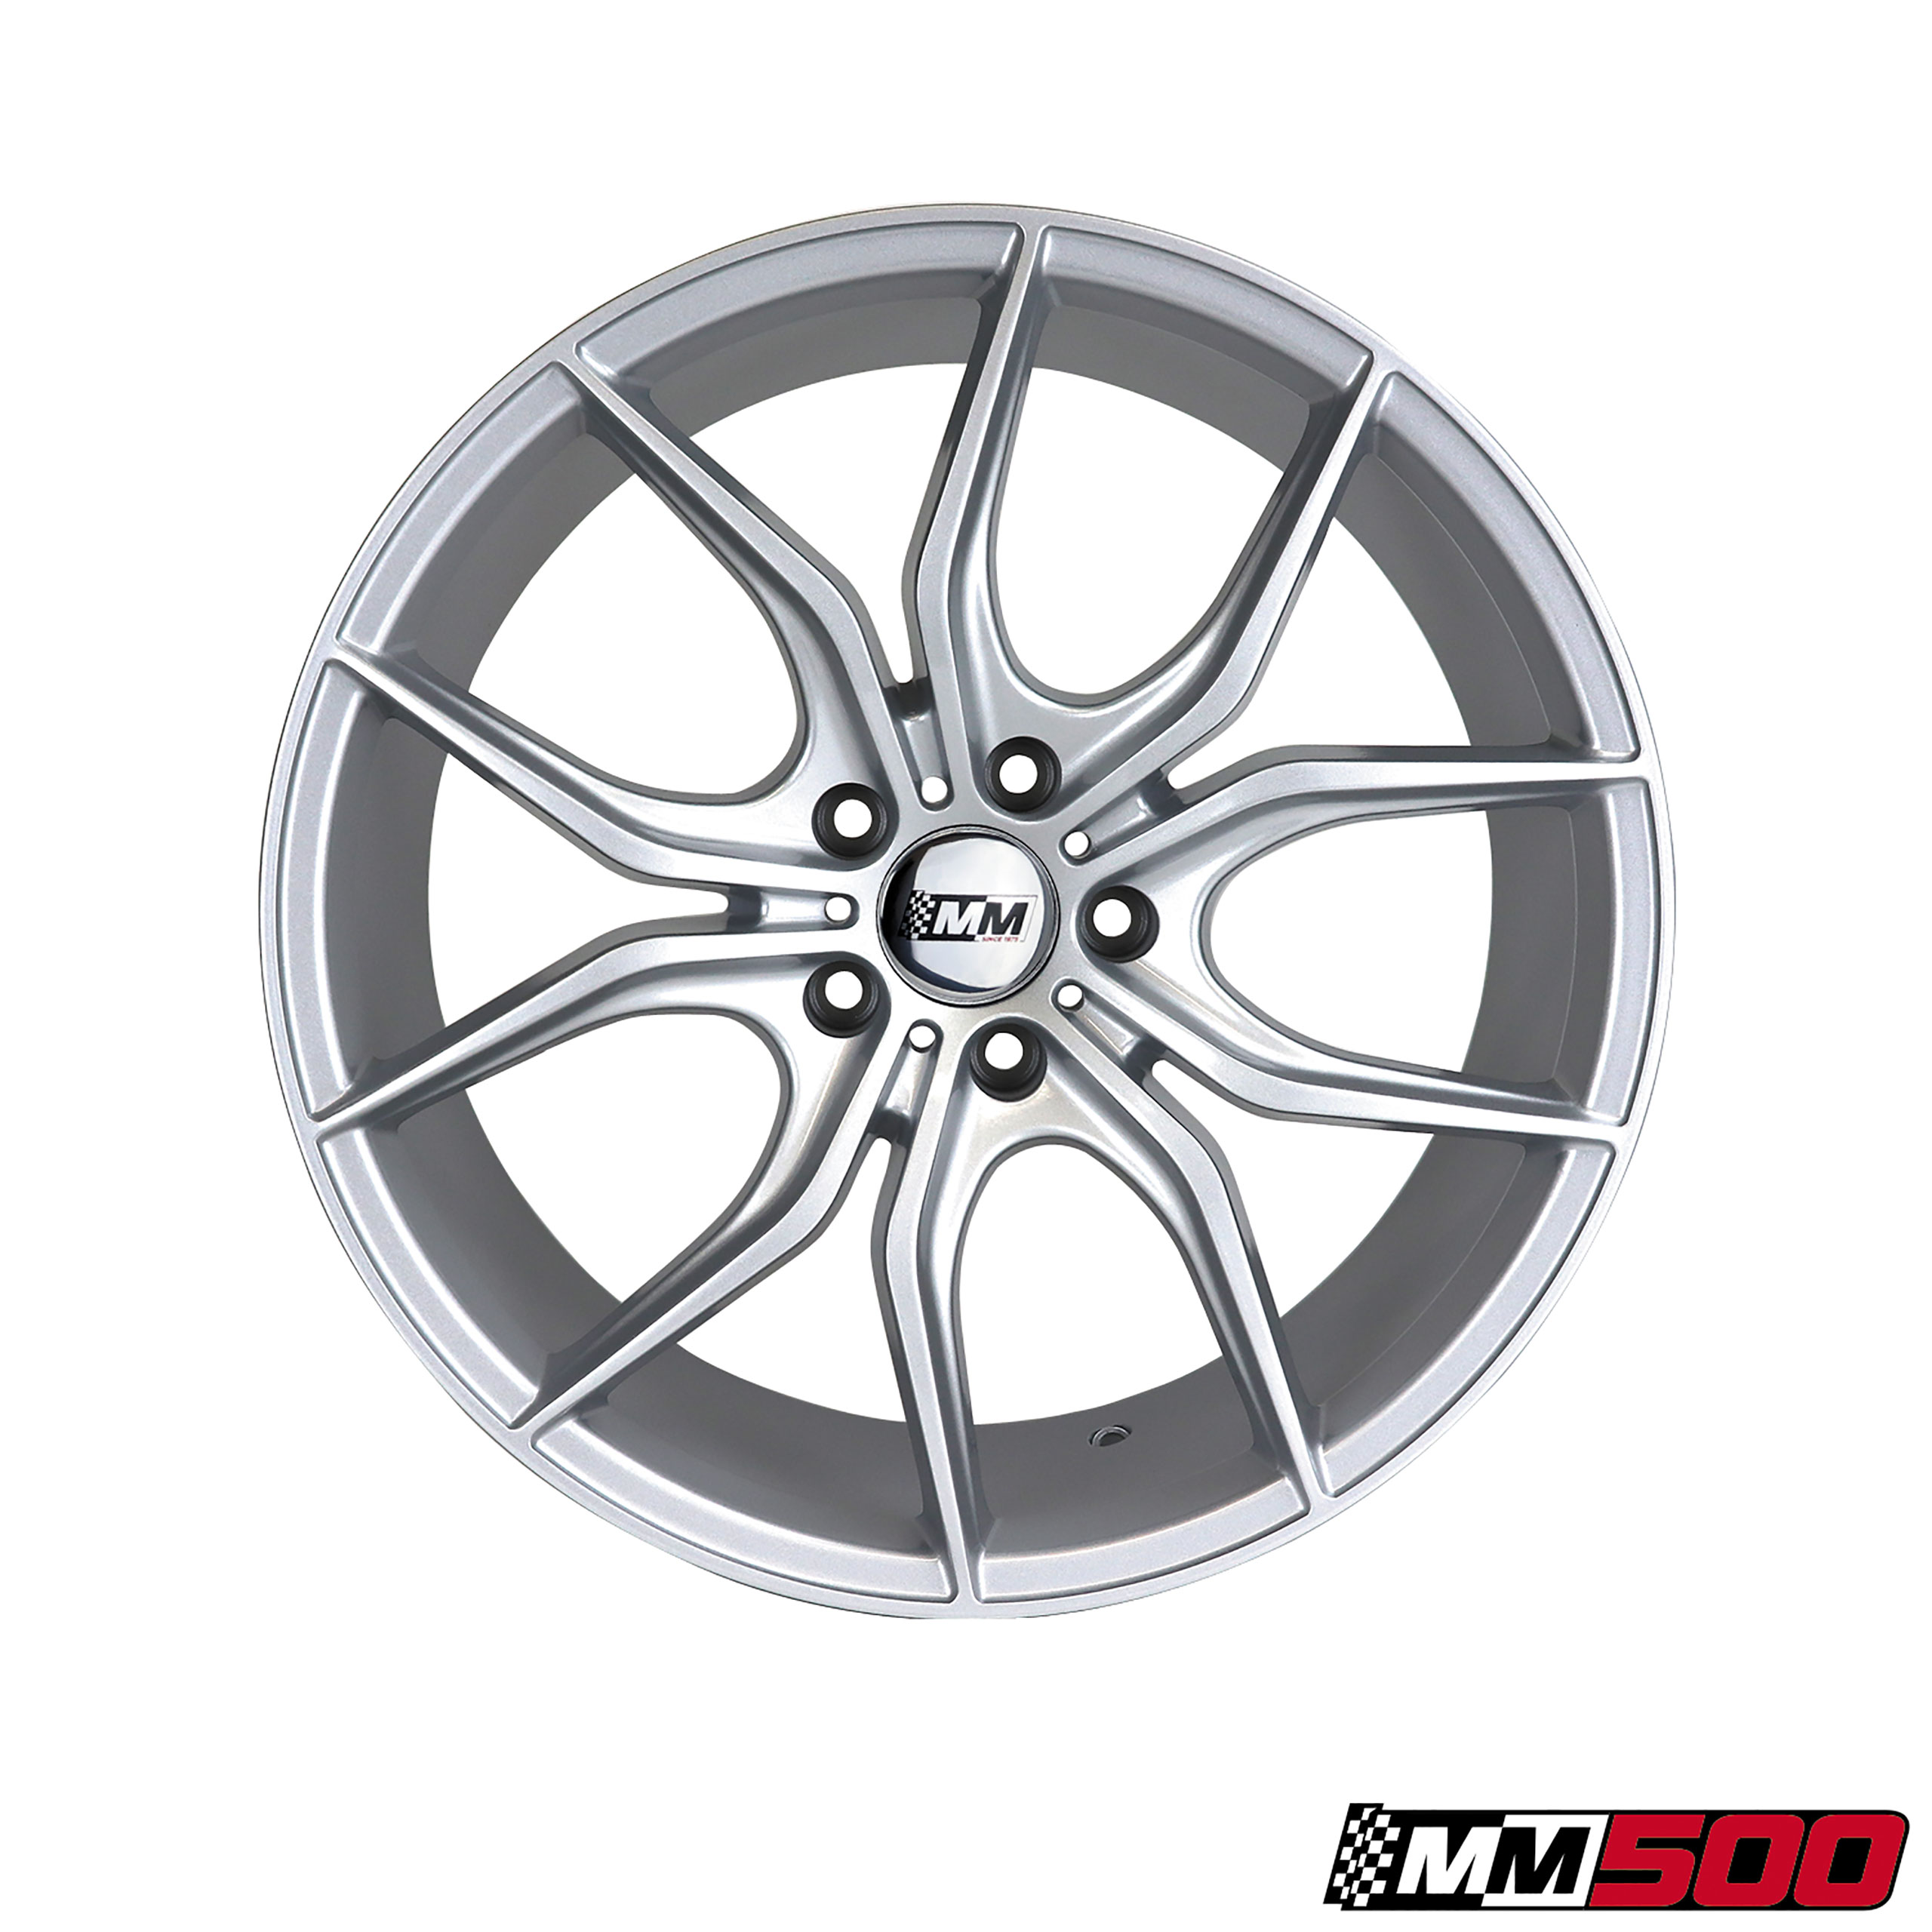 2005-2014 Ford Mustang C6-C7 MM500 19x8-5 Wheel - Silver CA-MA12390 